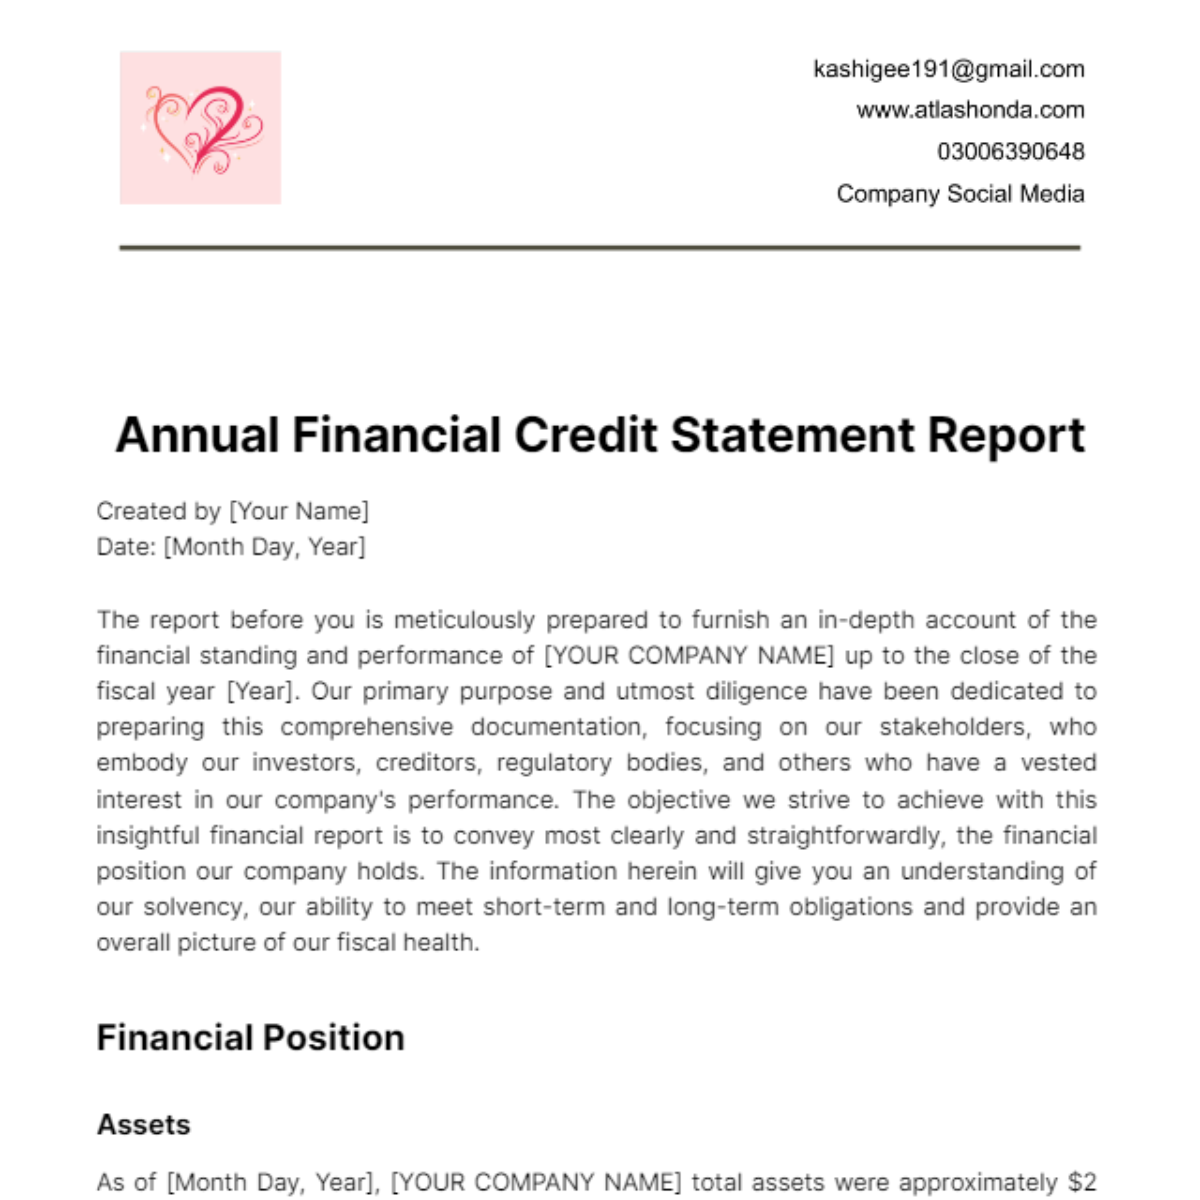 Free Annual Financial Credit Statement Report Template